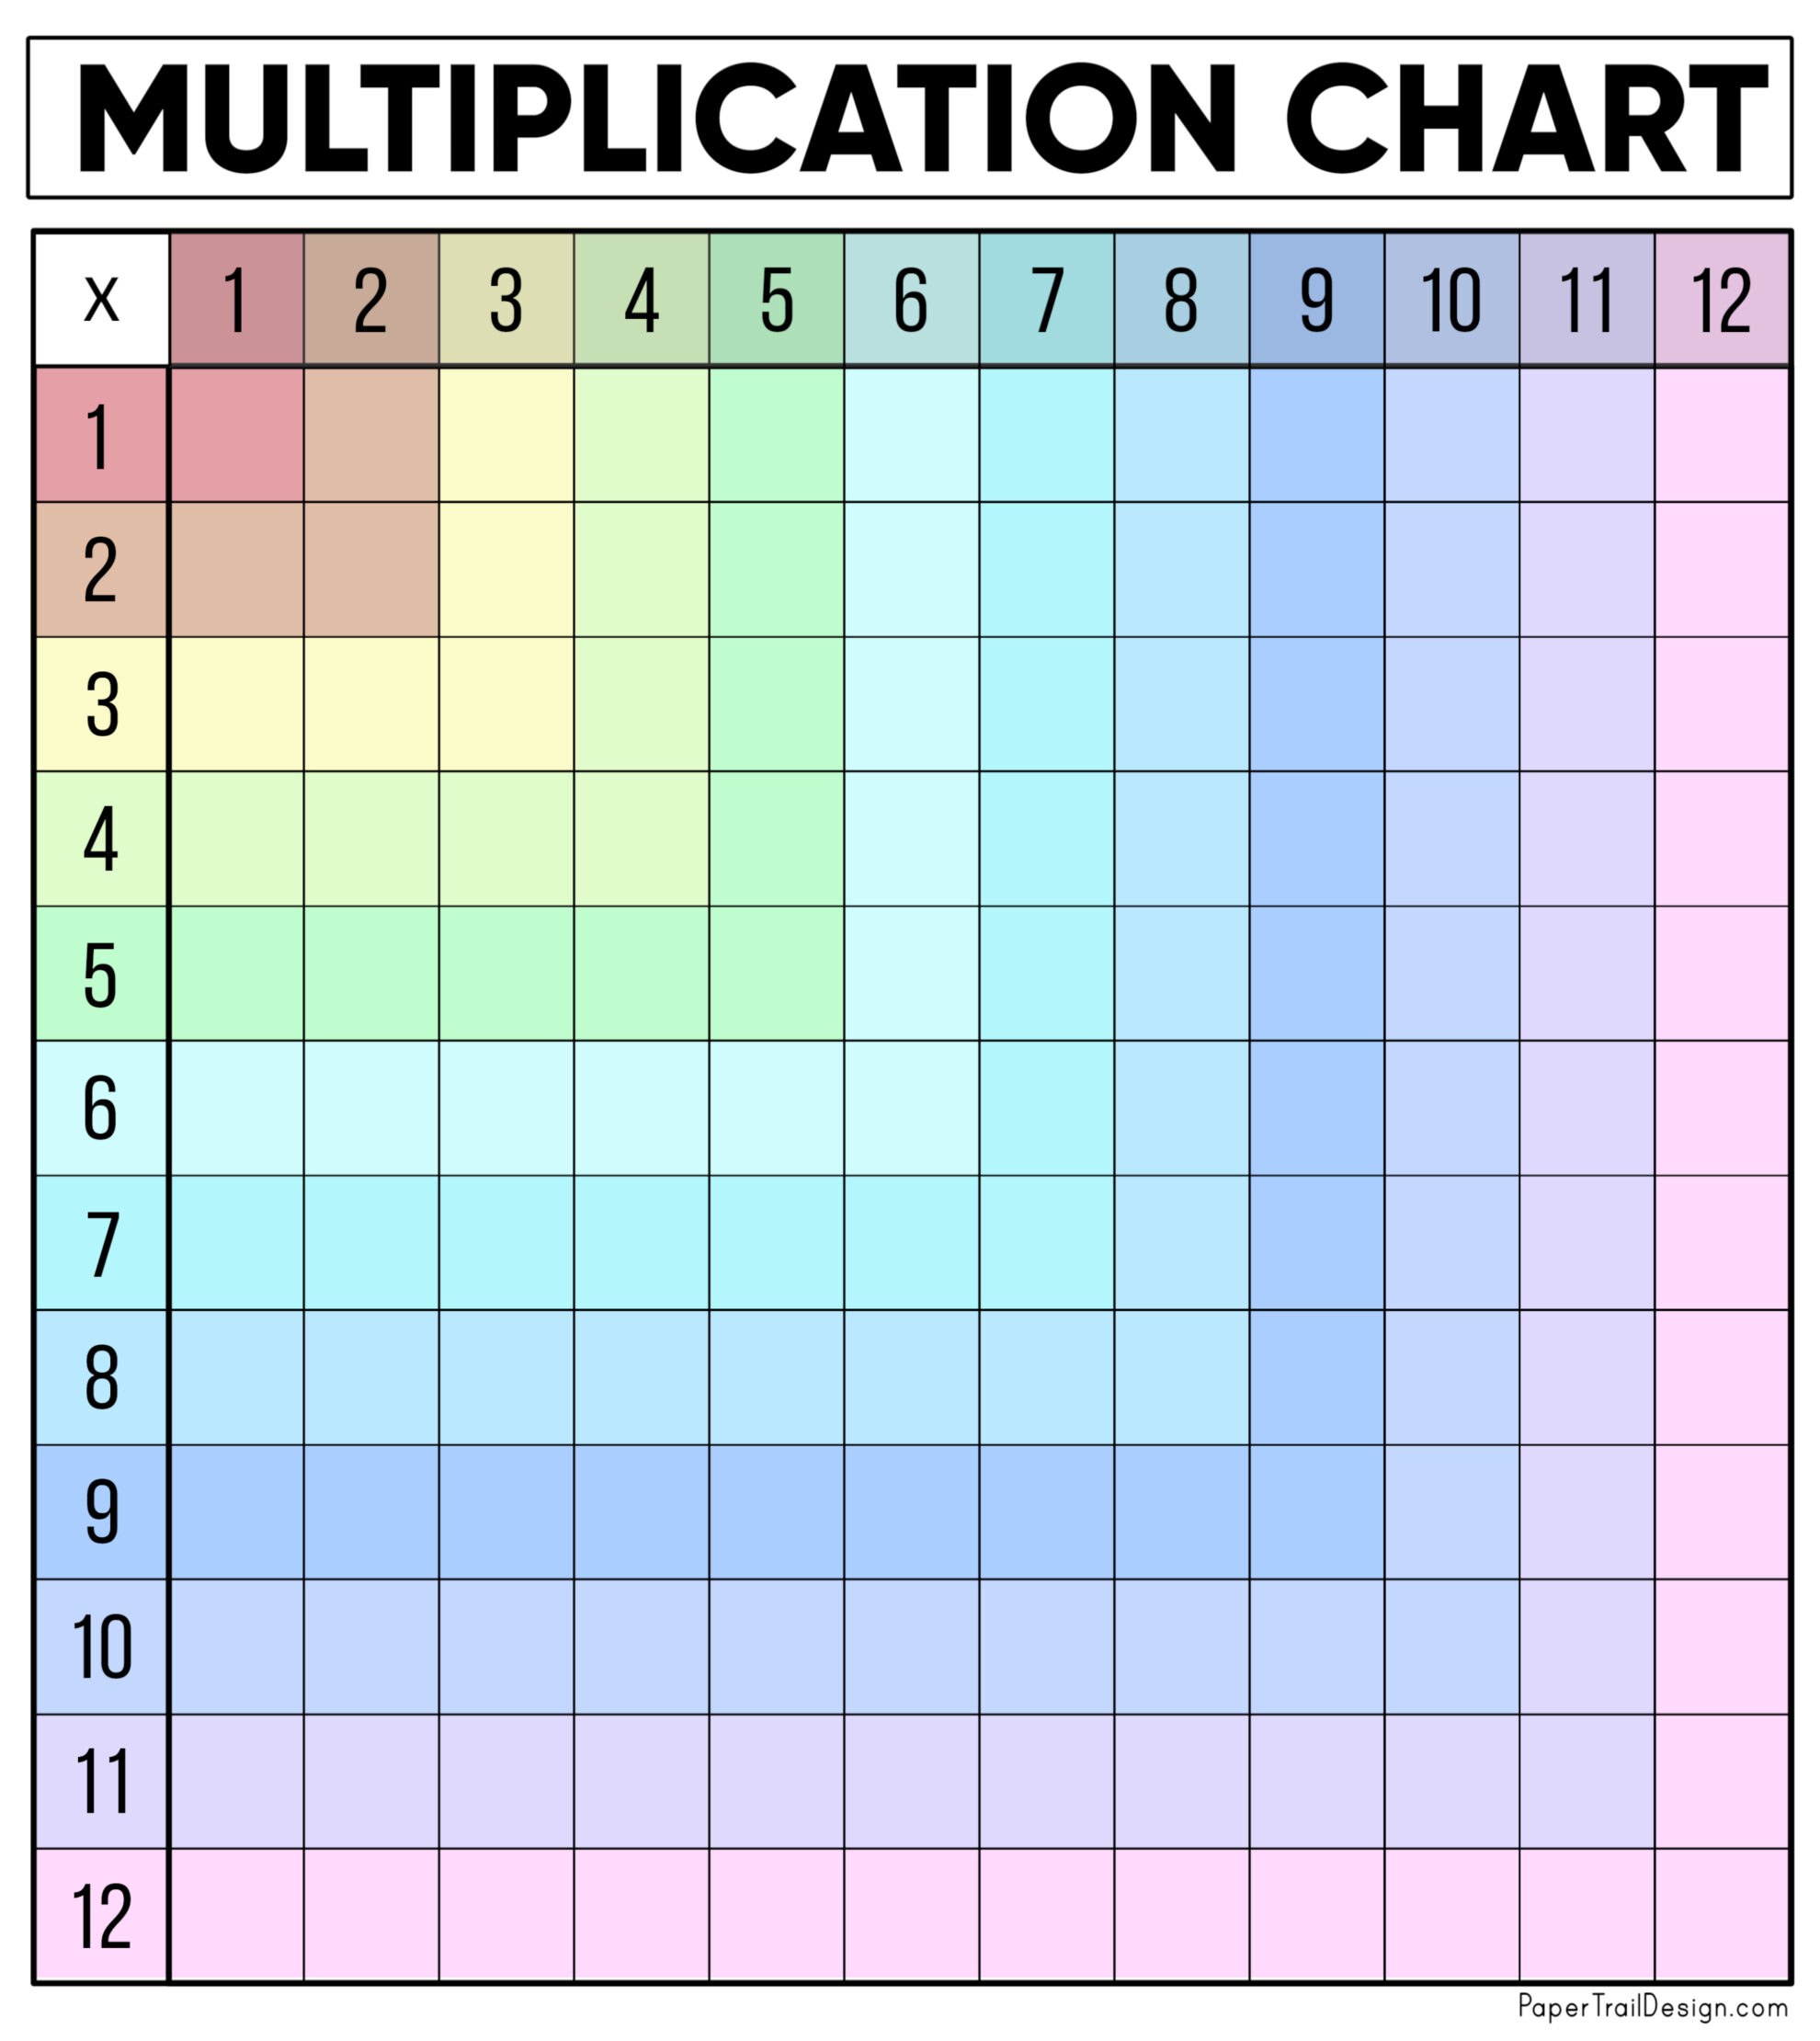 Free Multiplication Chart Printable - Paper Trail Design